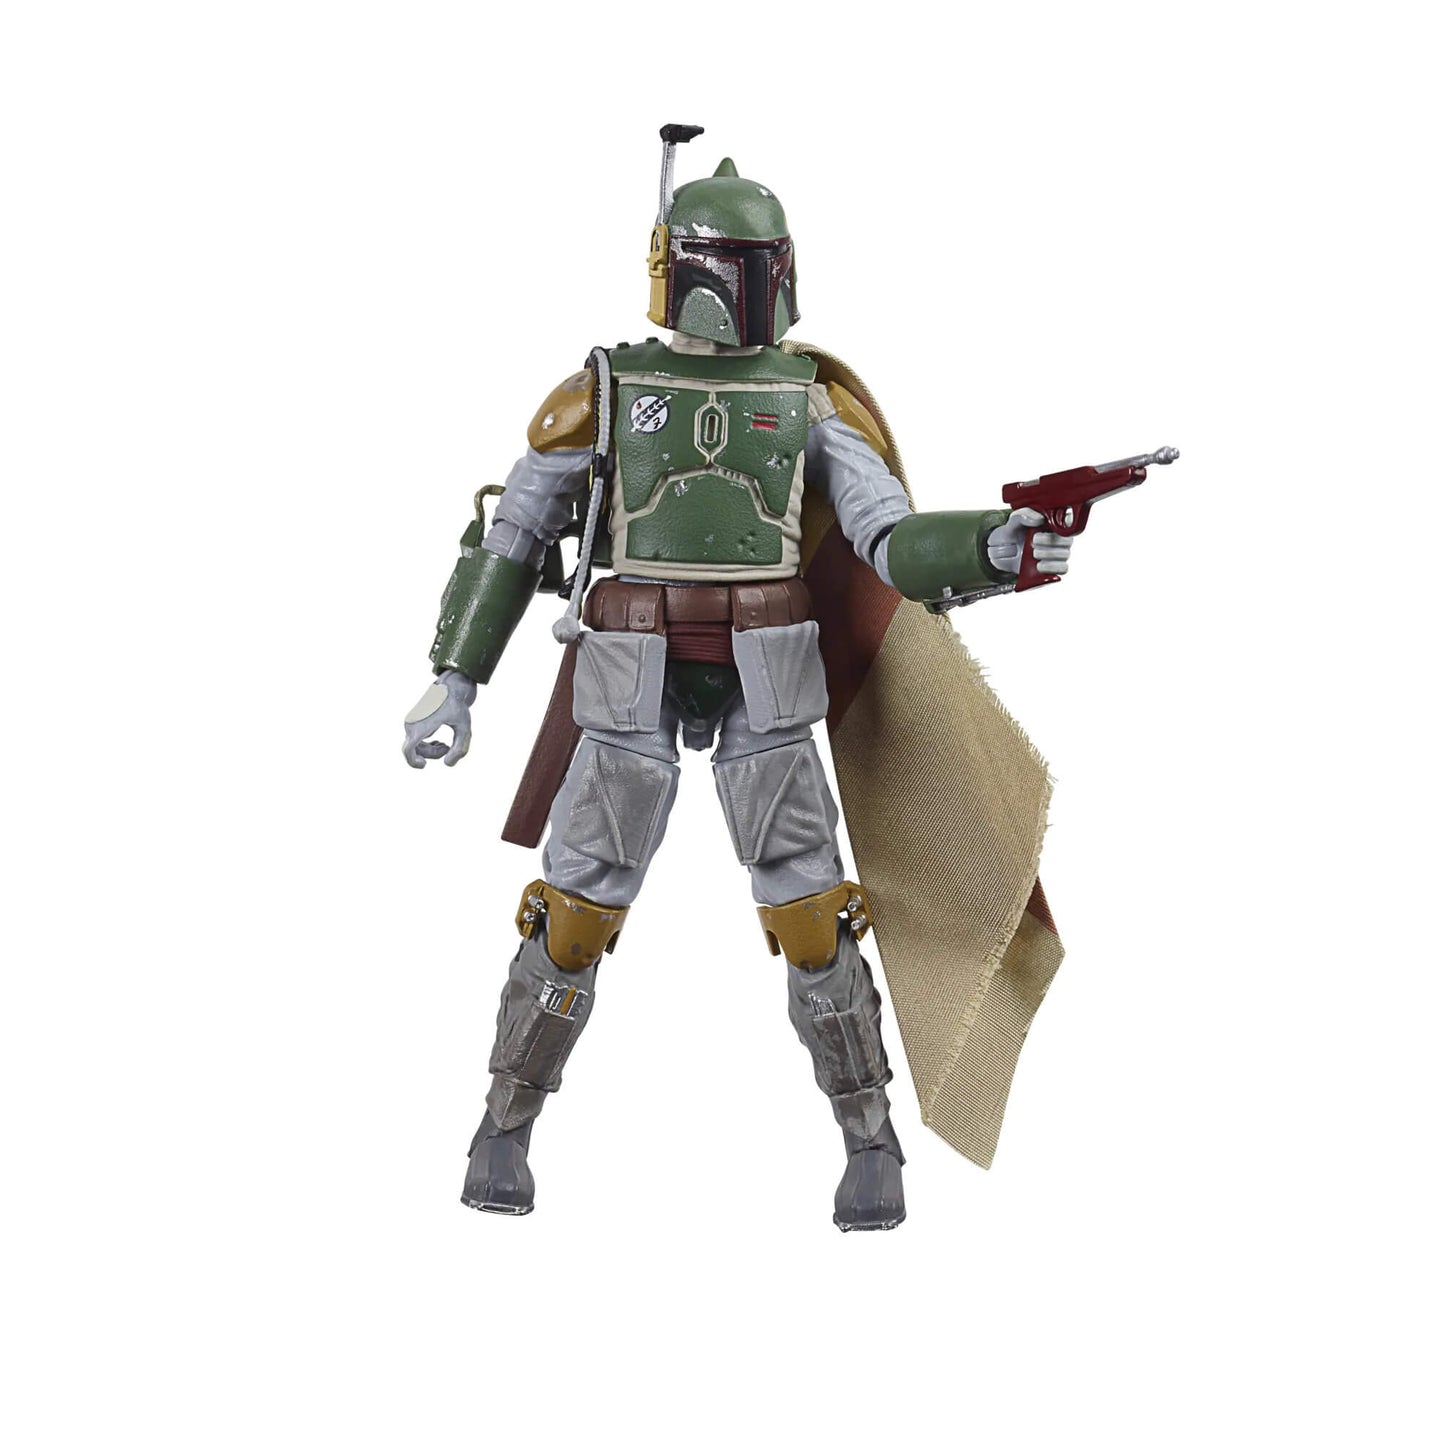 Star Wars The Black Seres 40th Anniversary Boba Fett Empire Strikes Back 6-inch action figure with accessories